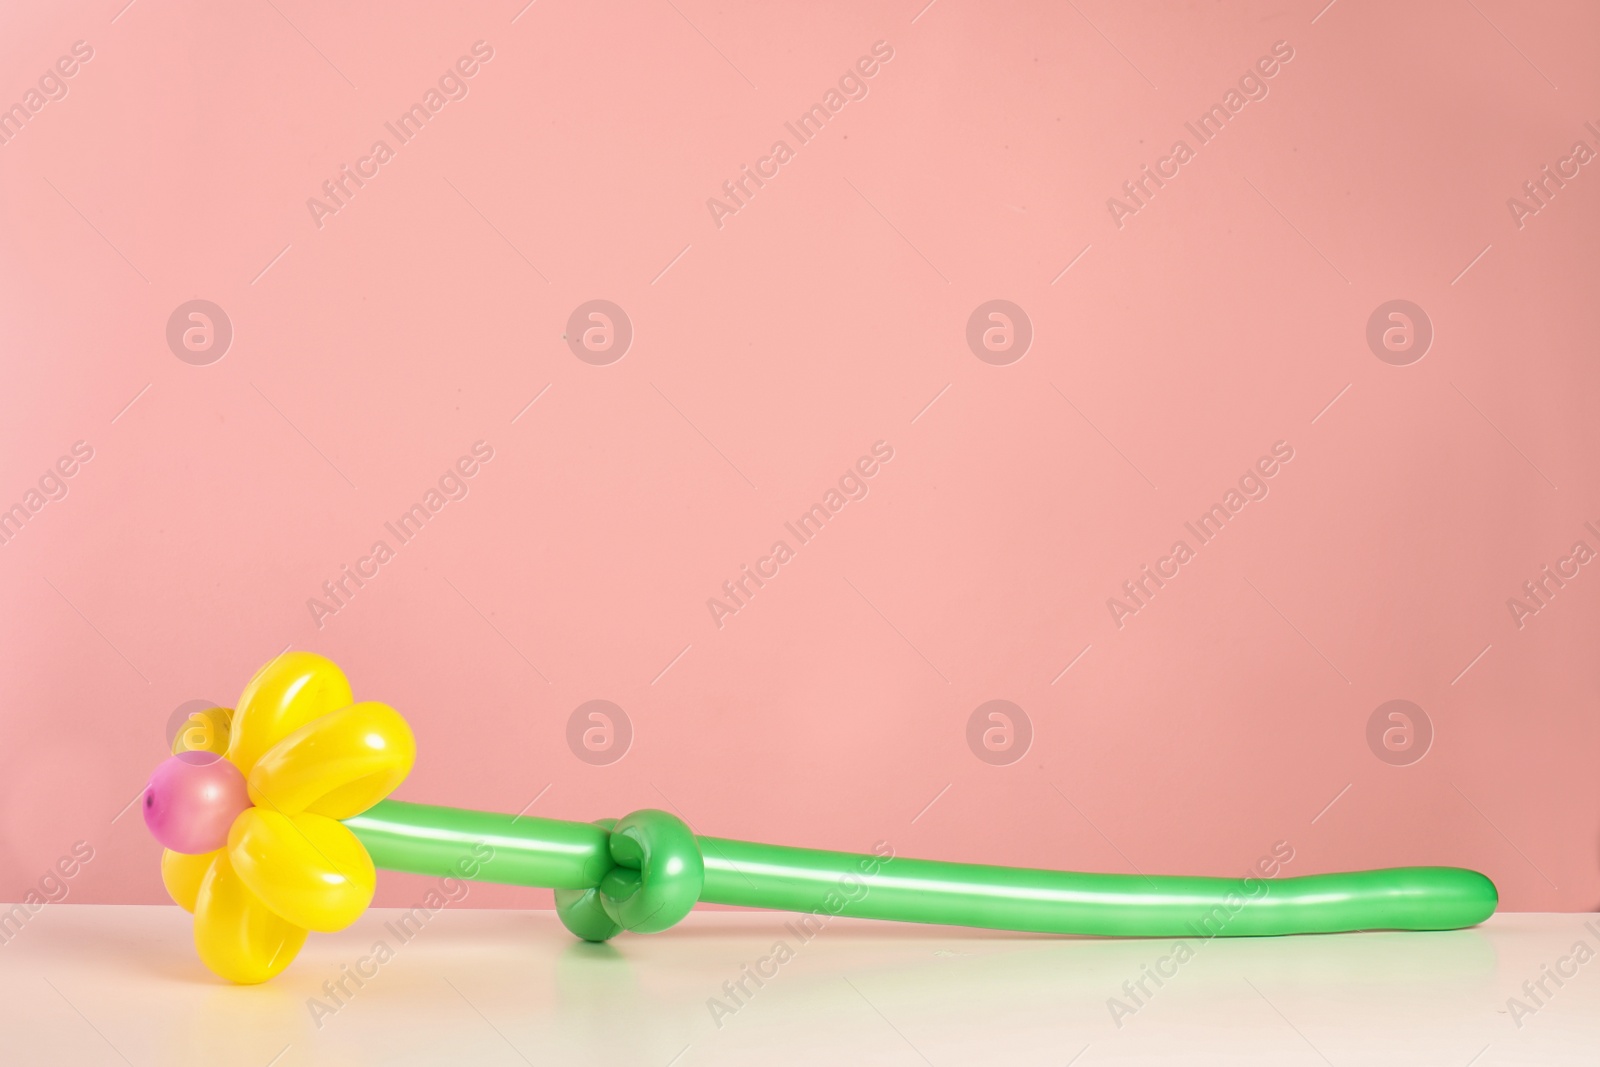 Photo of Flower figure made of modelling balloon on table against color background. Space for text